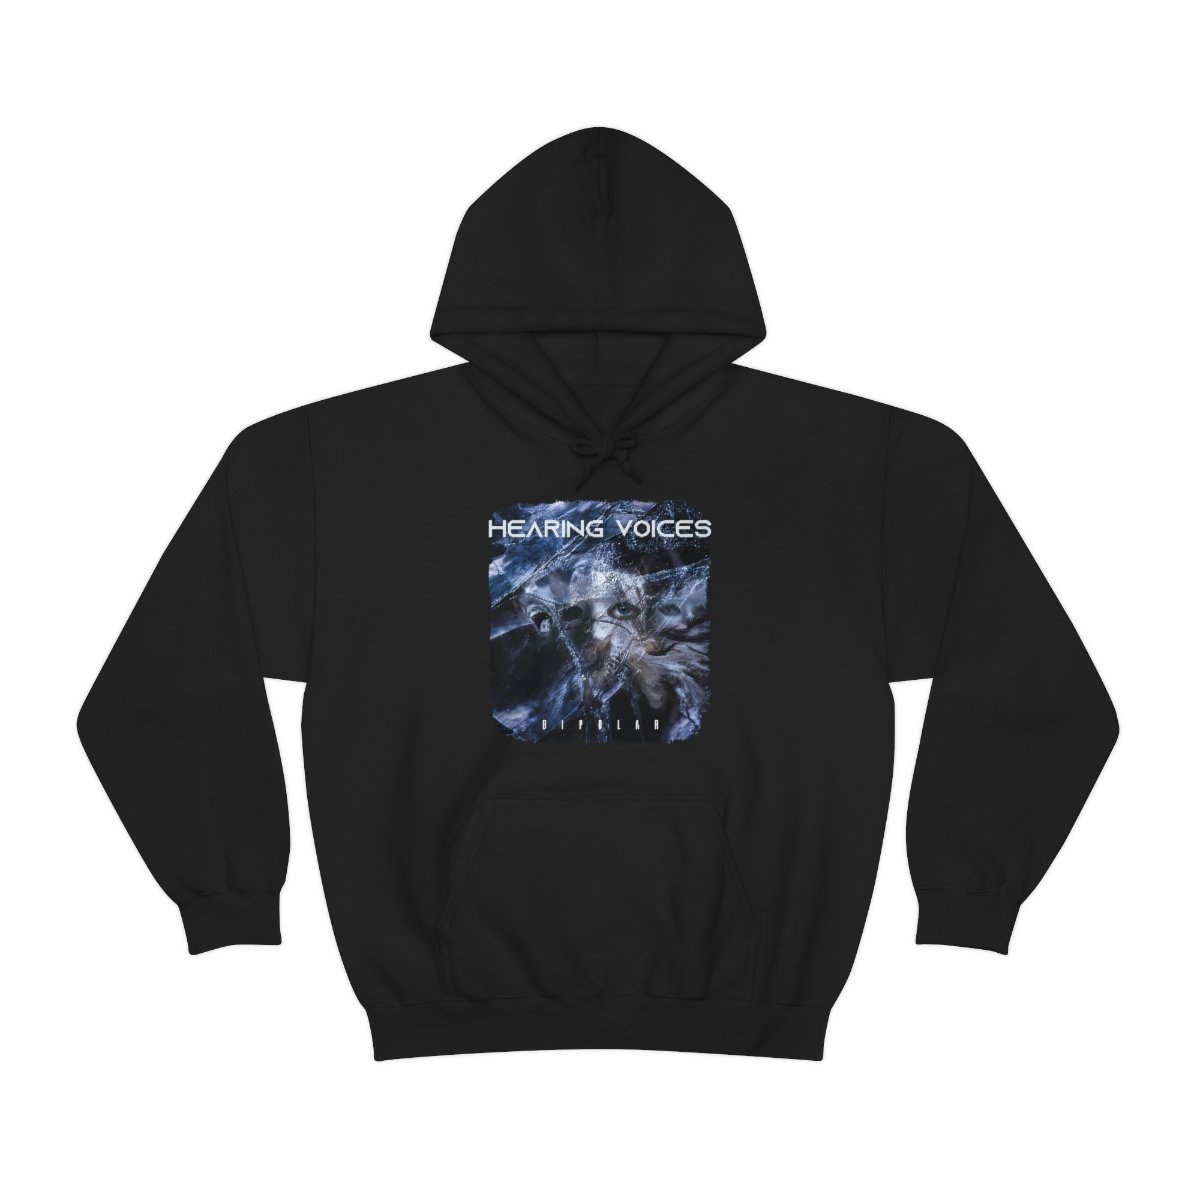 Hearing Voices – Bipolar Pullover Hooded Sweatshirt